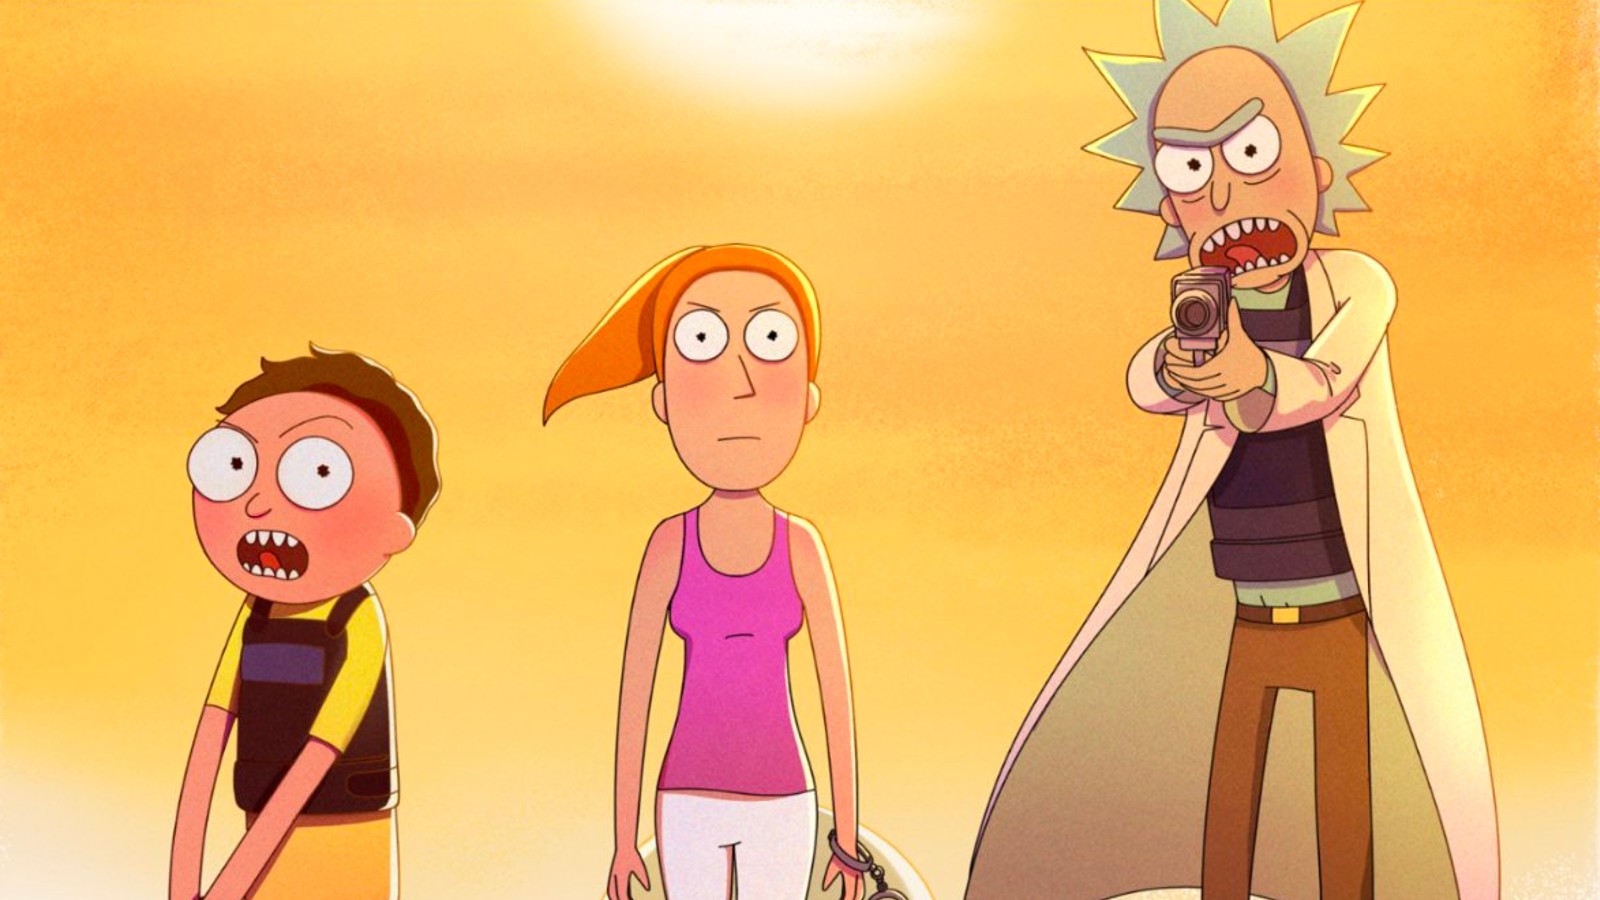 Rick and Morty Season 5: Where to Watch & Stream Online